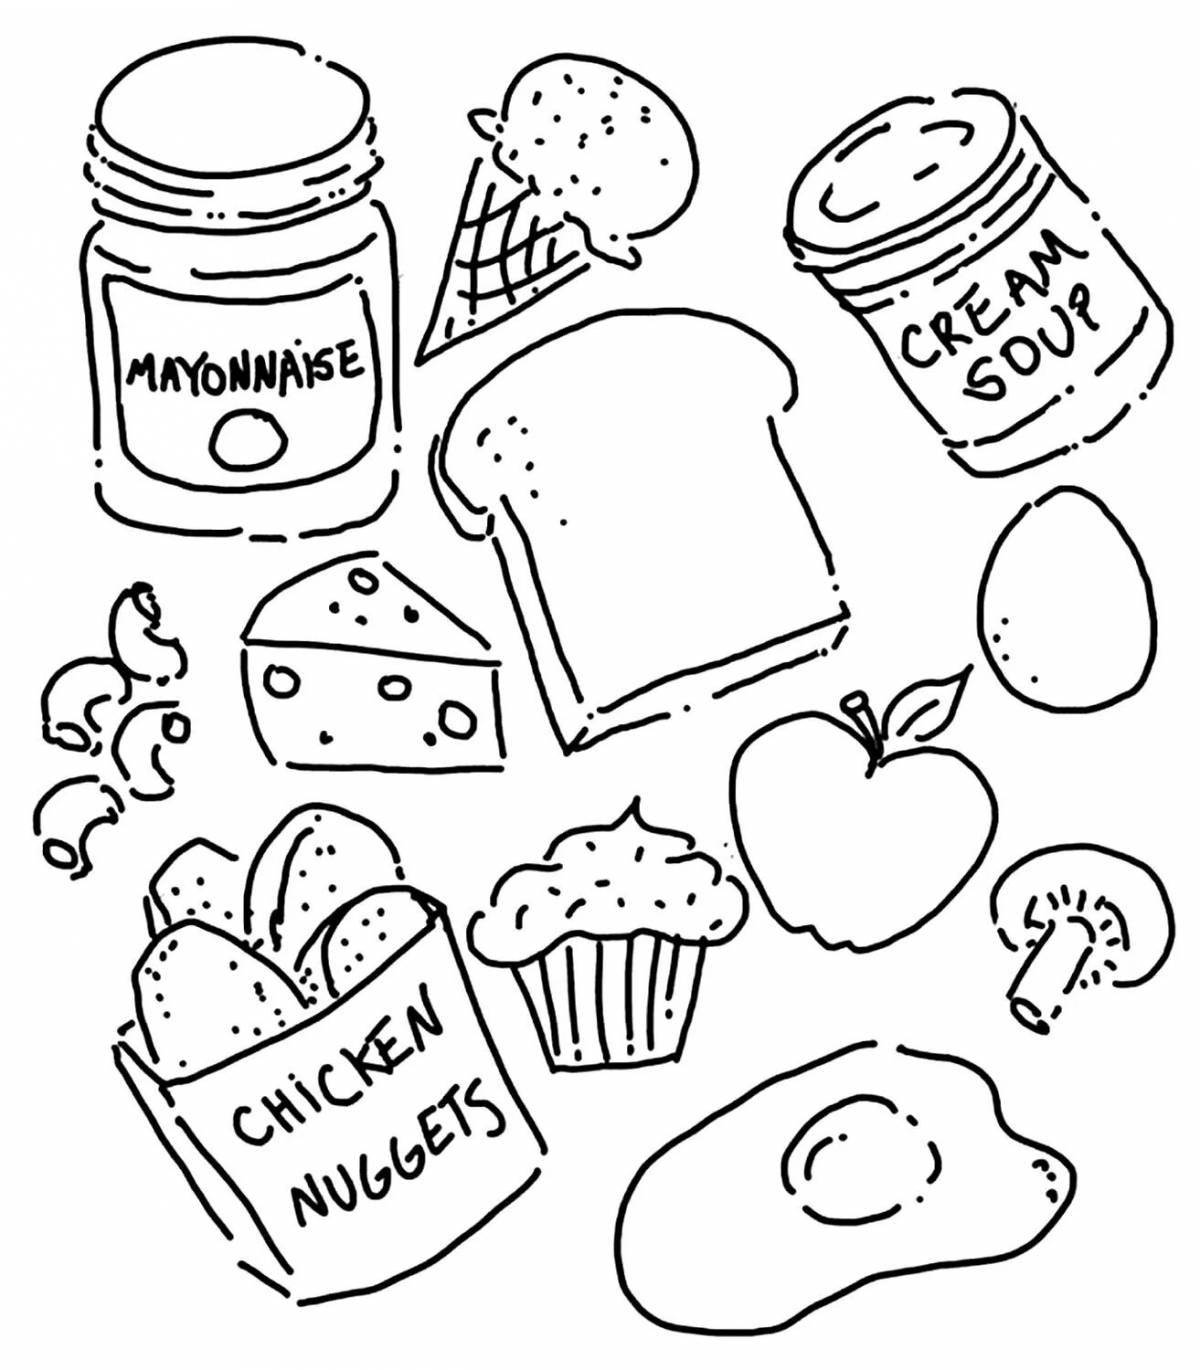 Aesthetic gourmet food coloring page